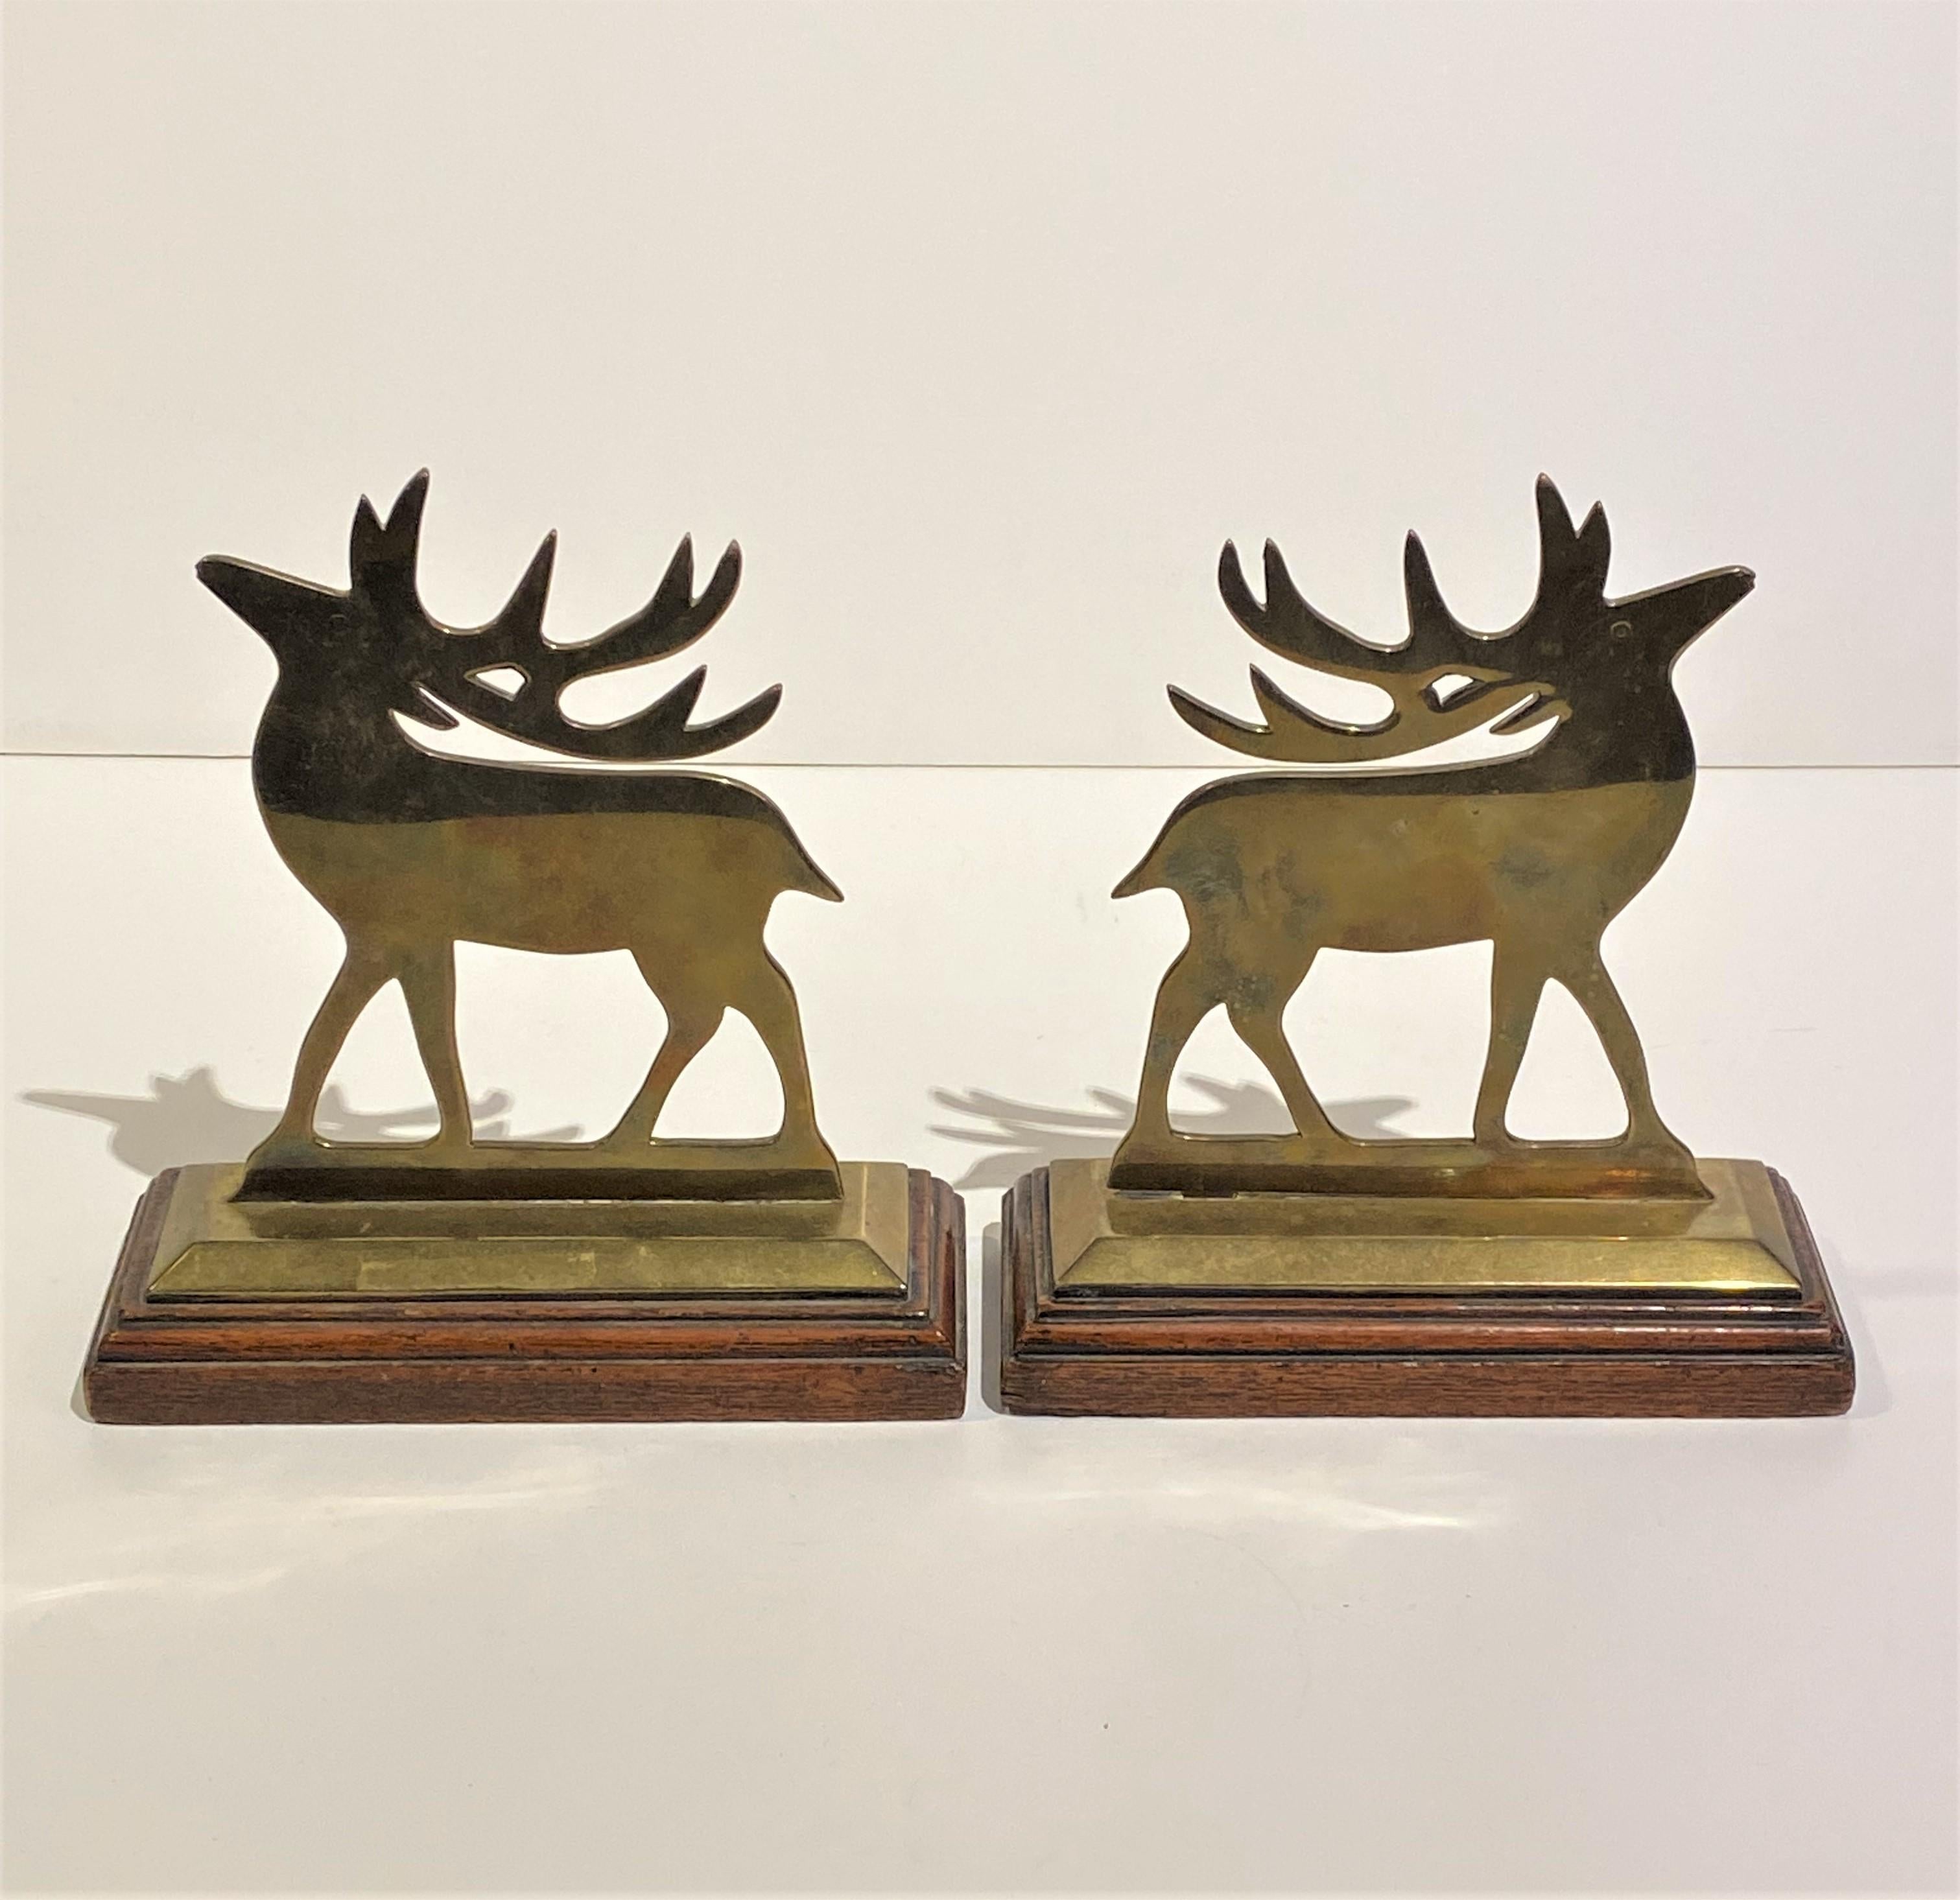 A wonderful unique pair of old solid brass Reindeer chimney ornaments on Oak stands from England.  Circa 1860.